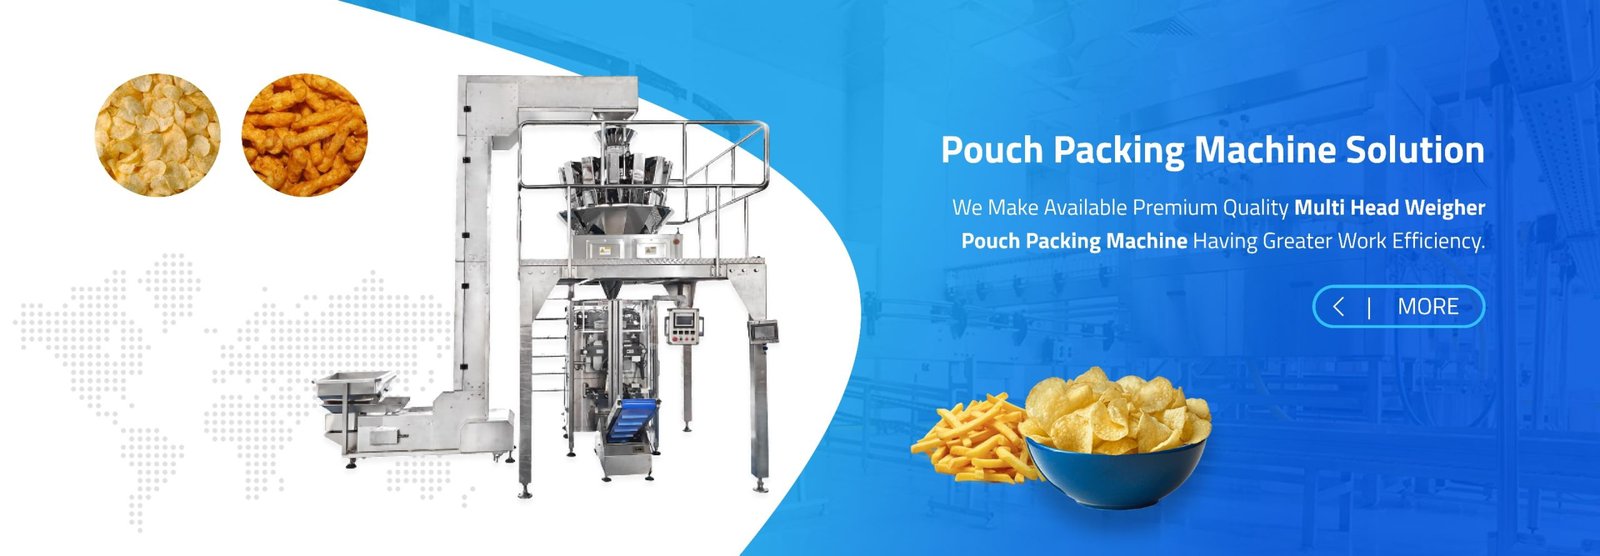 Pouch Packing Machines Manufacturer